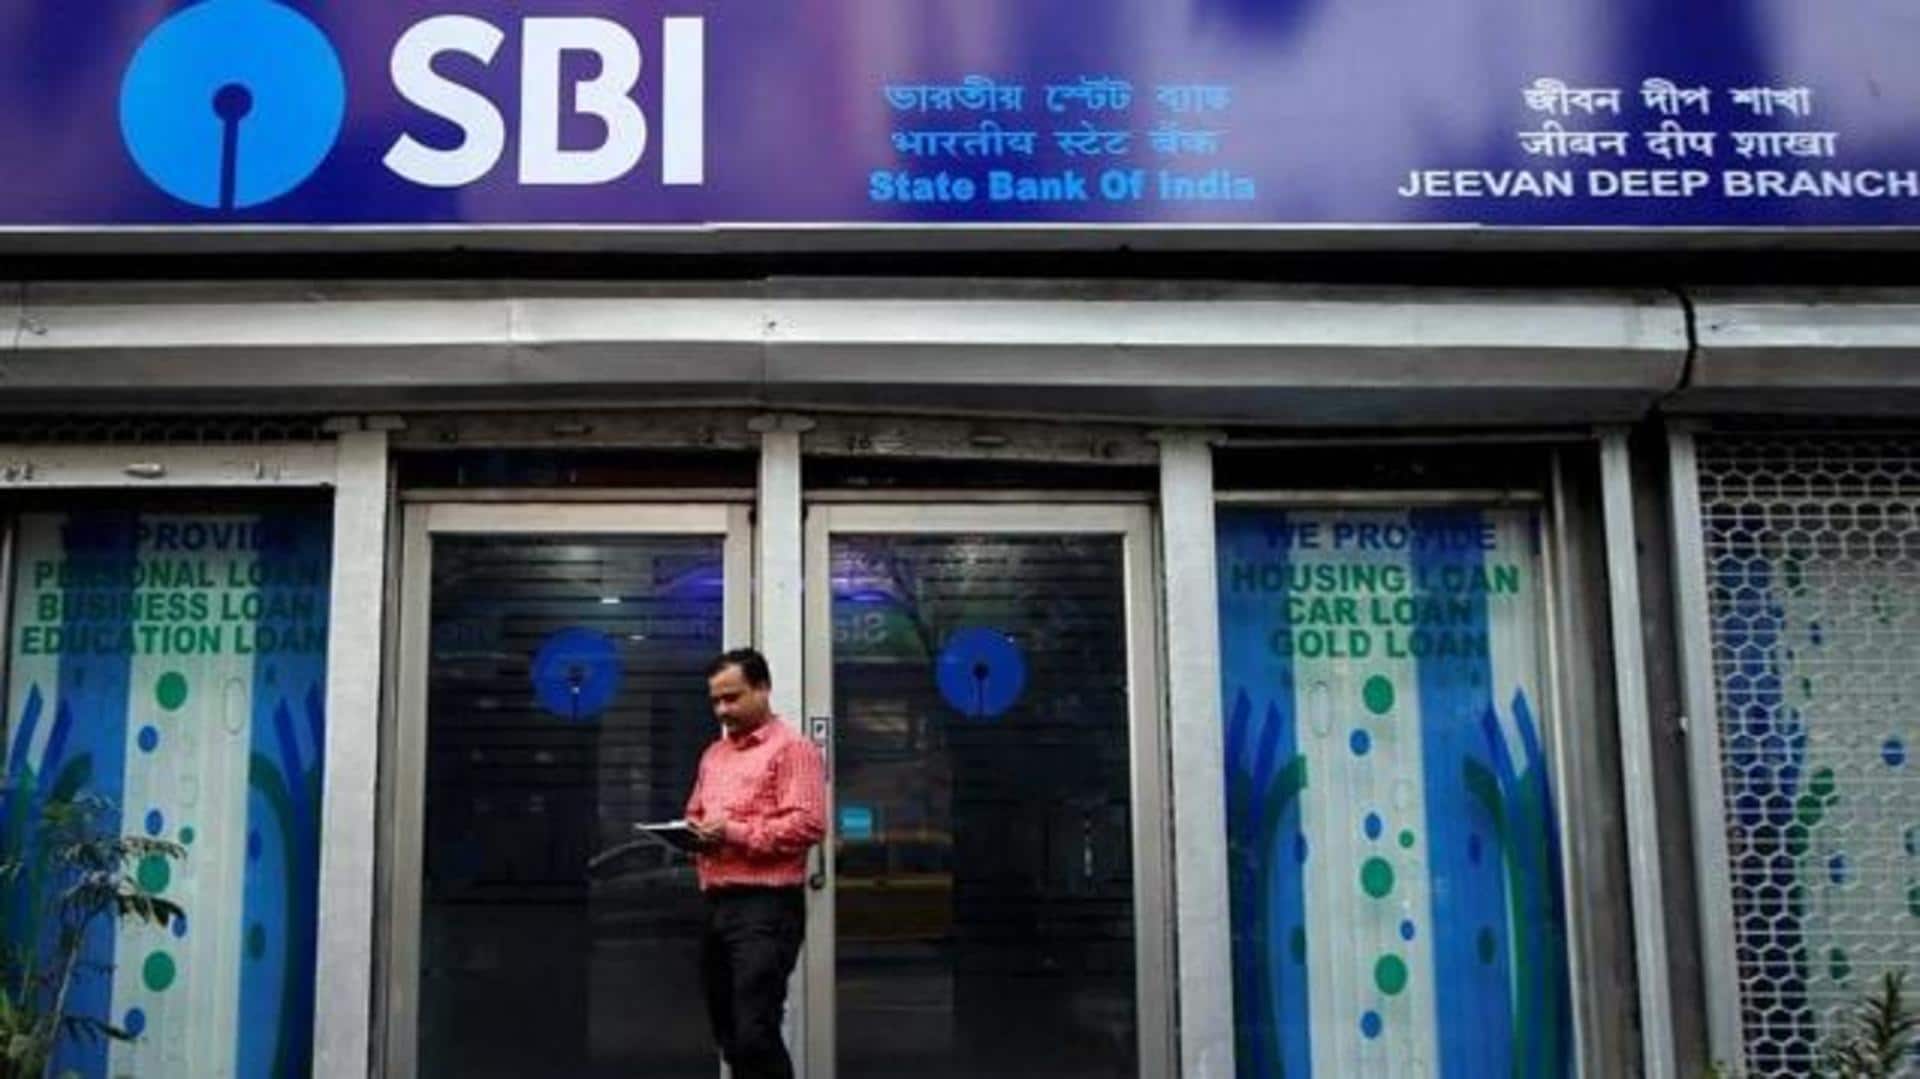 SBI's m-cap fell the most in Asia-Pacific in Q1 2023